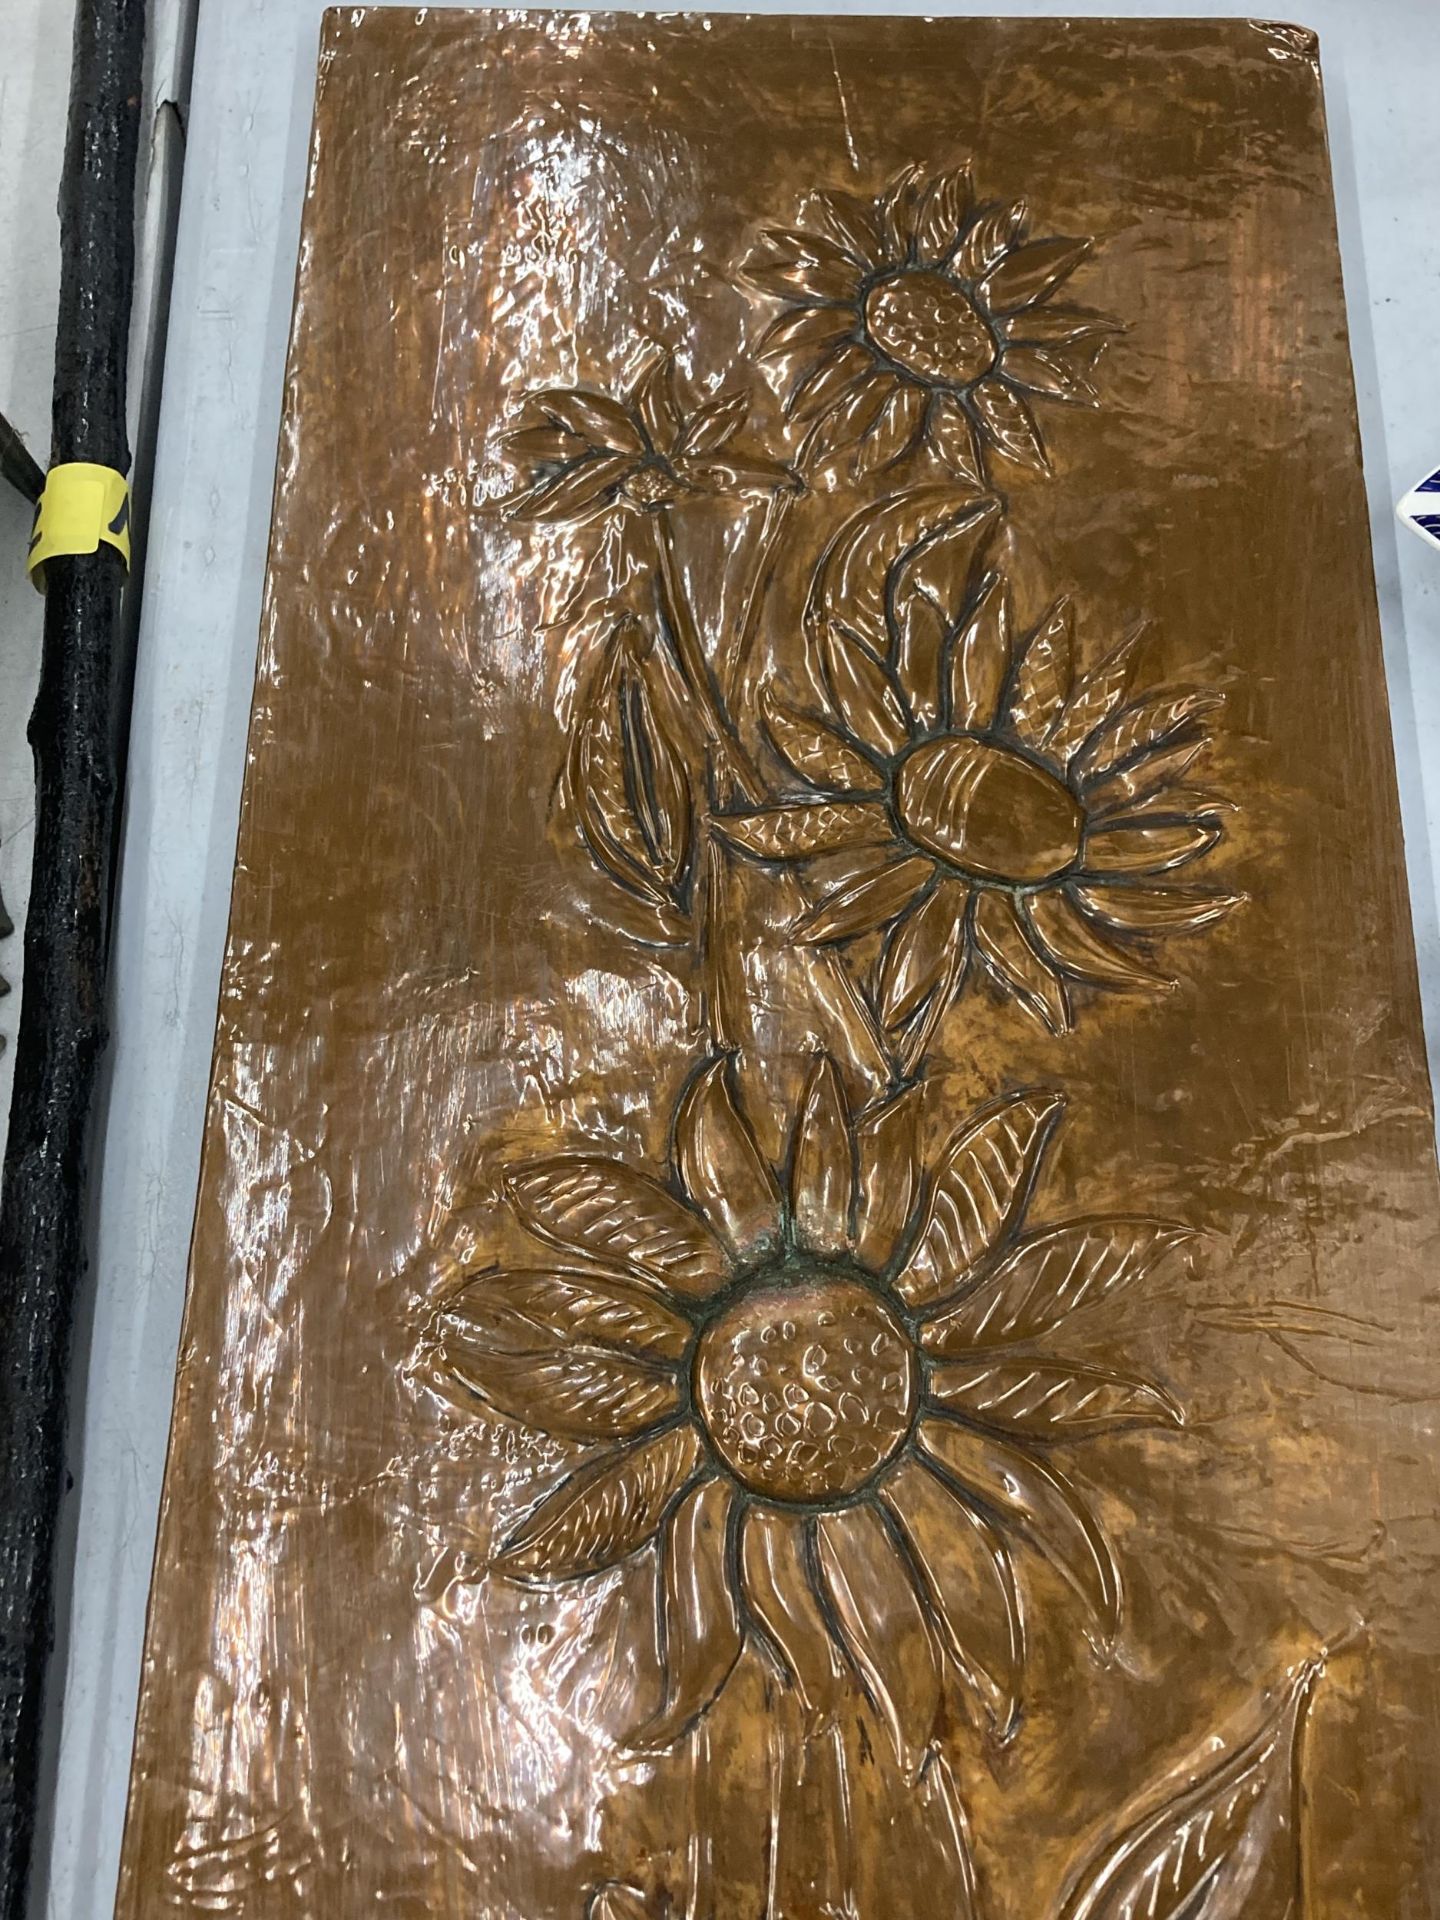 AN ARTS AND CRAFTS COPPER PANEL, WITH WOODEN BACK AND FLORAL DESIGN, 30CM X 88CM - Image 3 of 3